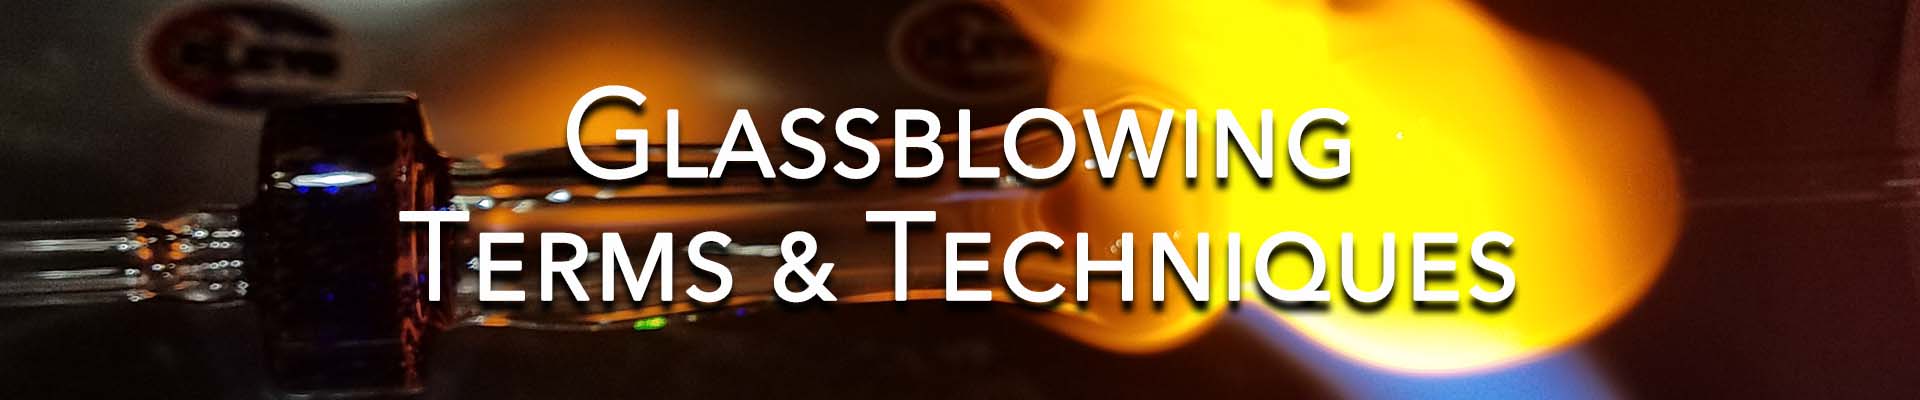 Glassblowing Terms and Techniques